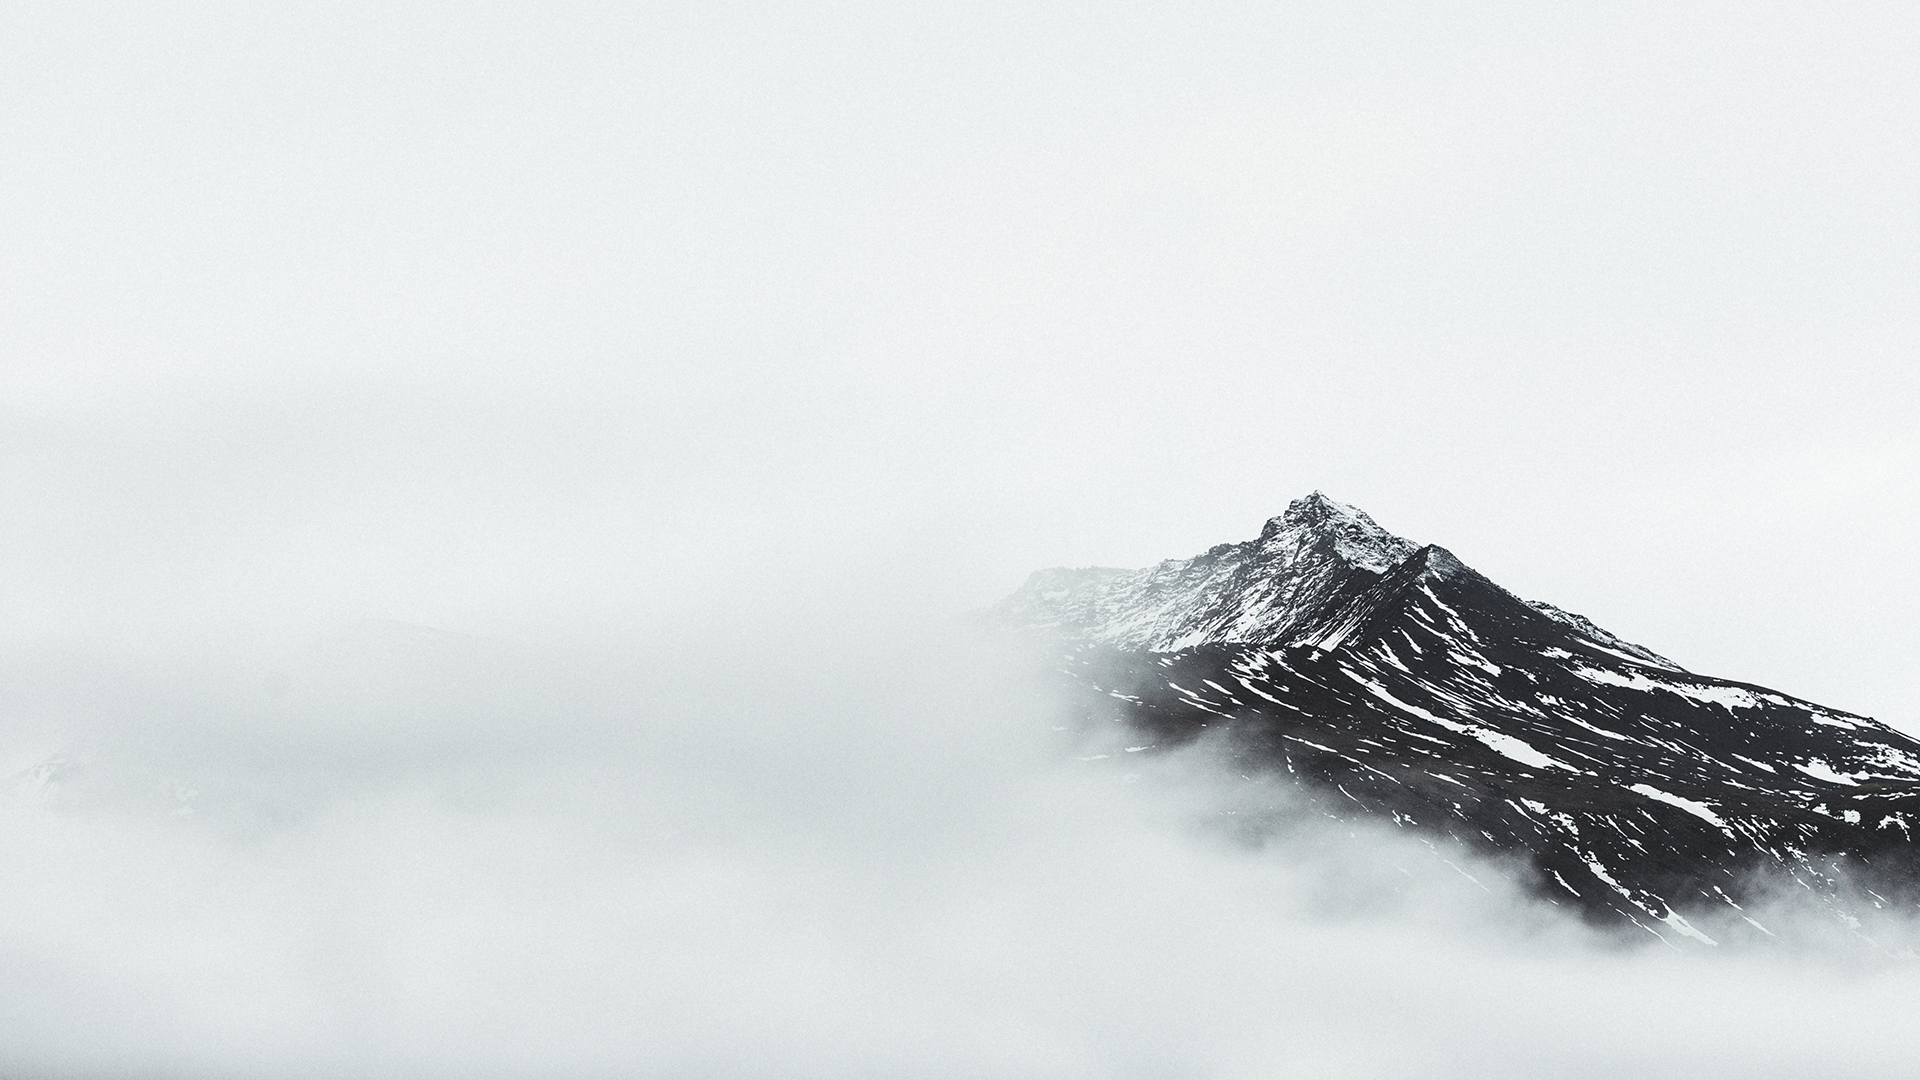 Benjamin Hardman on his epic photography workshop with Alex Strohl